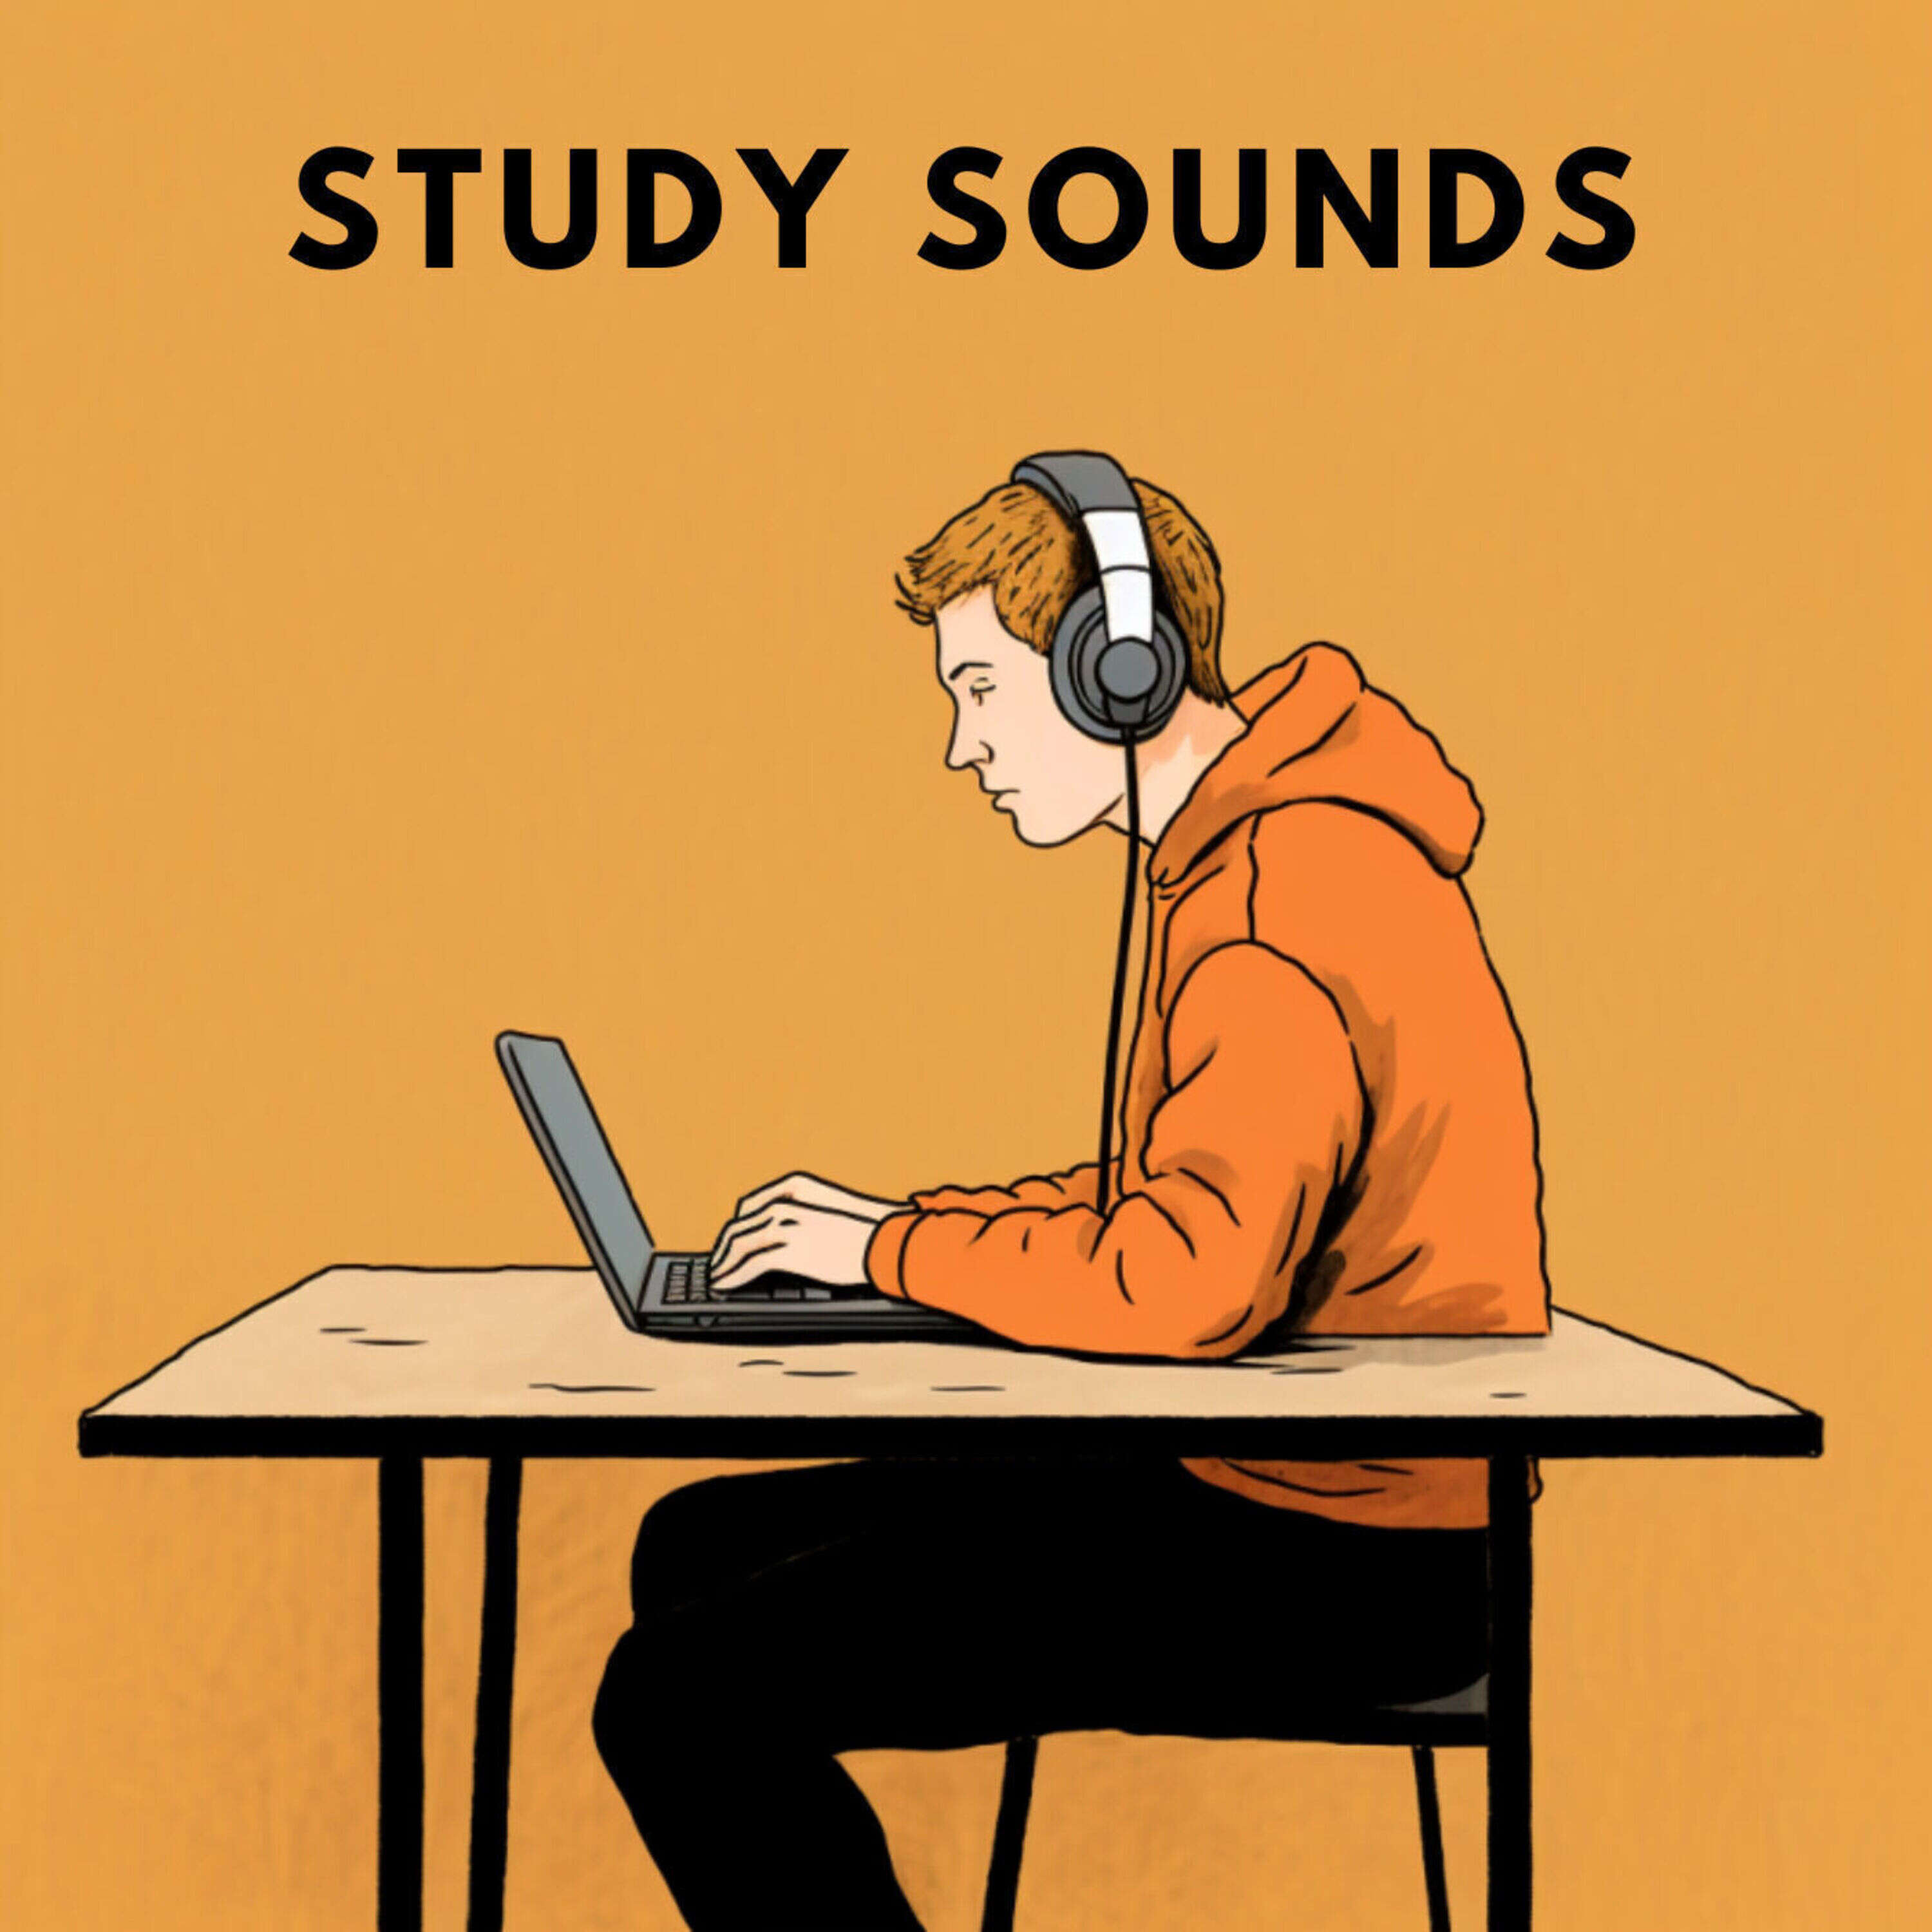 you are studying with some classical Sounds in an ancient academy [STUDY SOUNDS]